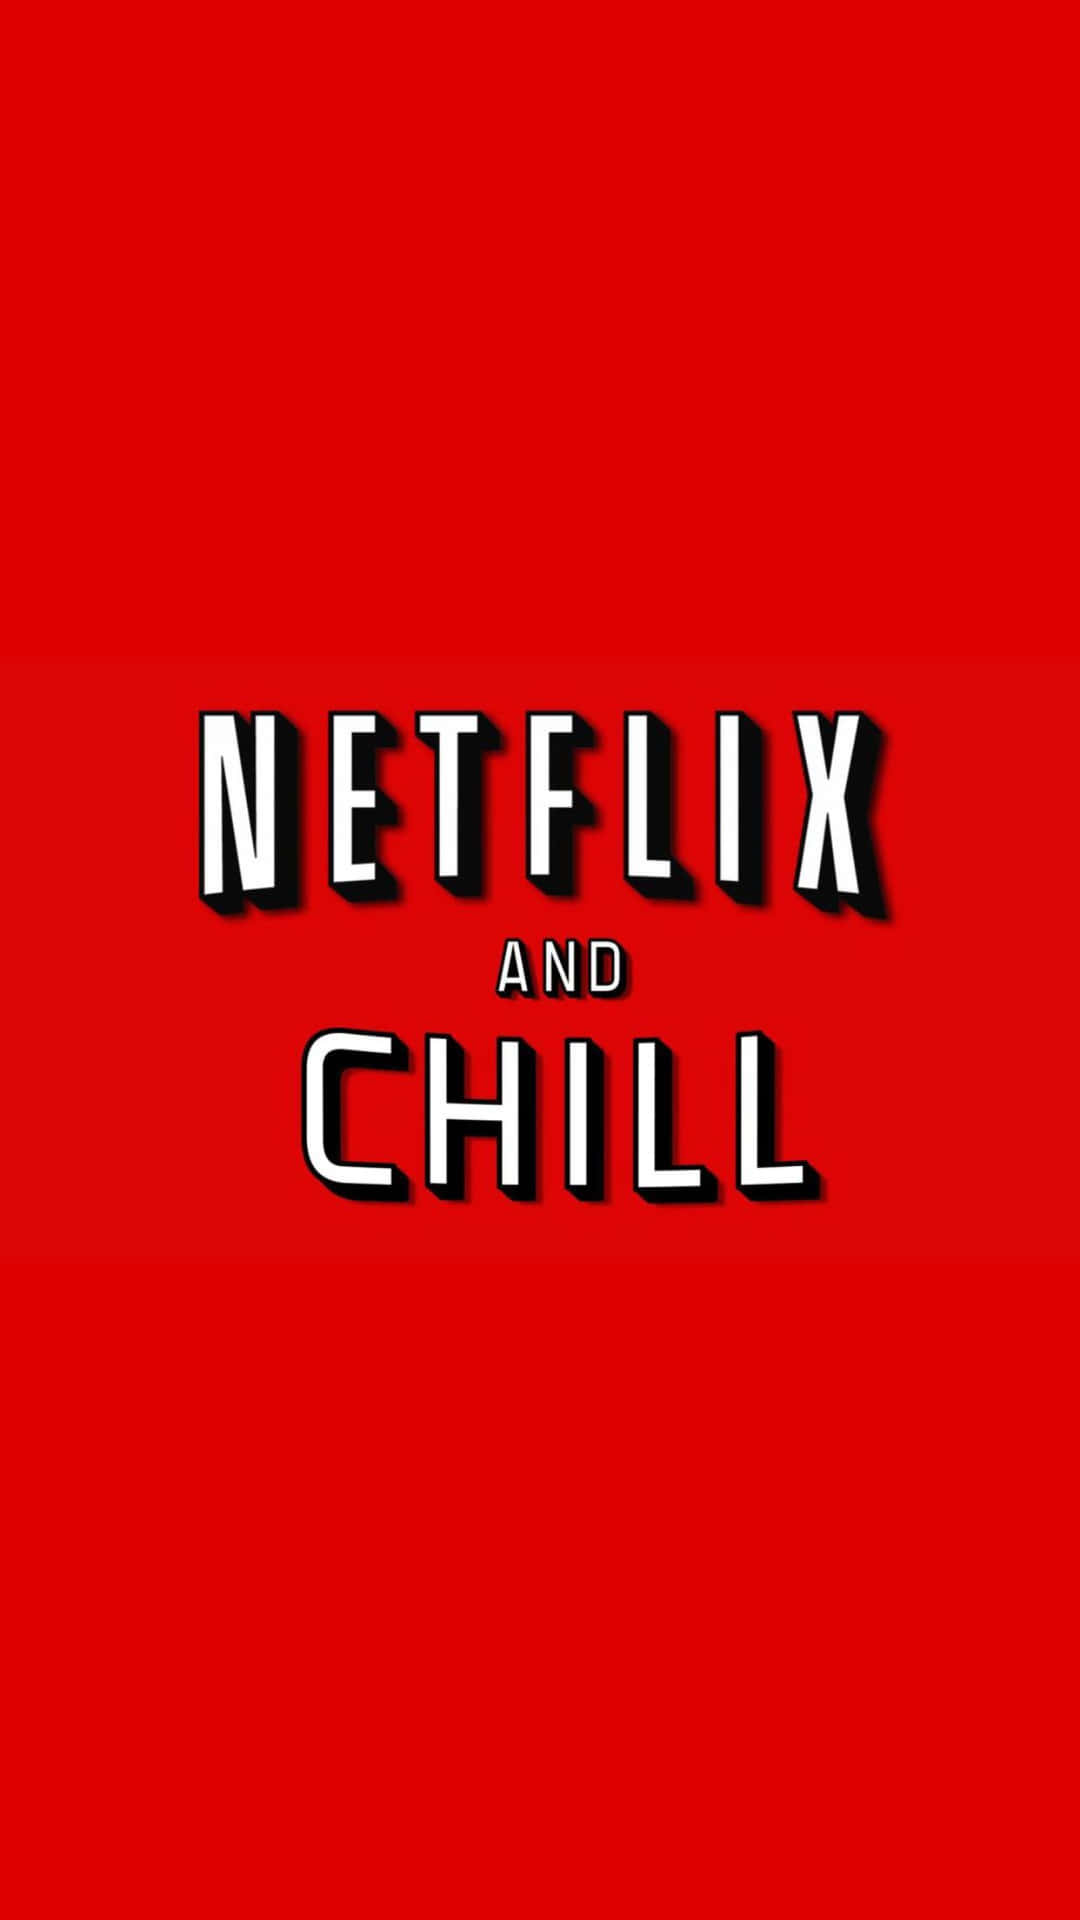 Download Netflix And Chill Aesthetic Wallpaper